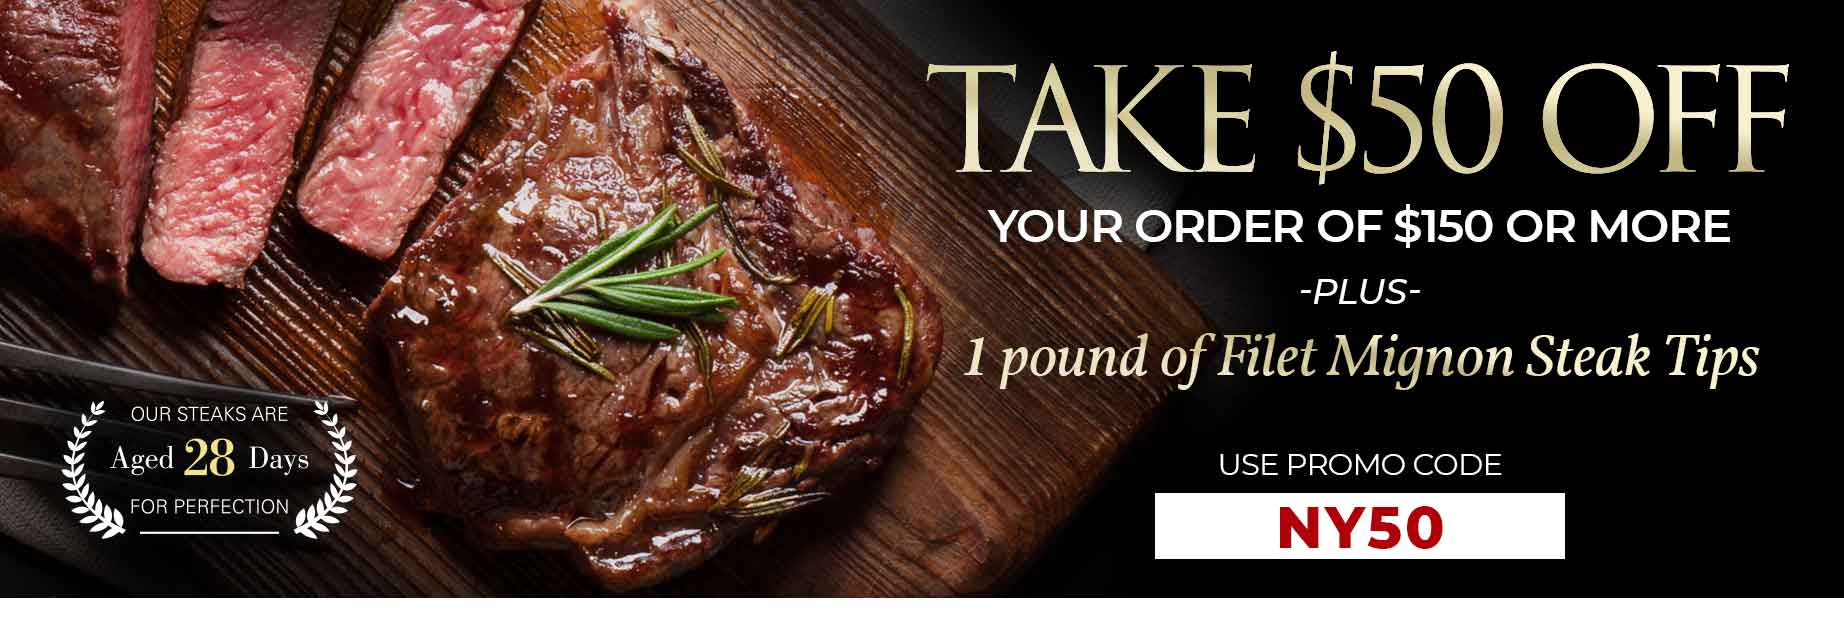 Limited Time Offer - $50 Off Plus FREE 1LB of Filet Mignon Steak Tips on Orders $150+ use Promo code: NY50